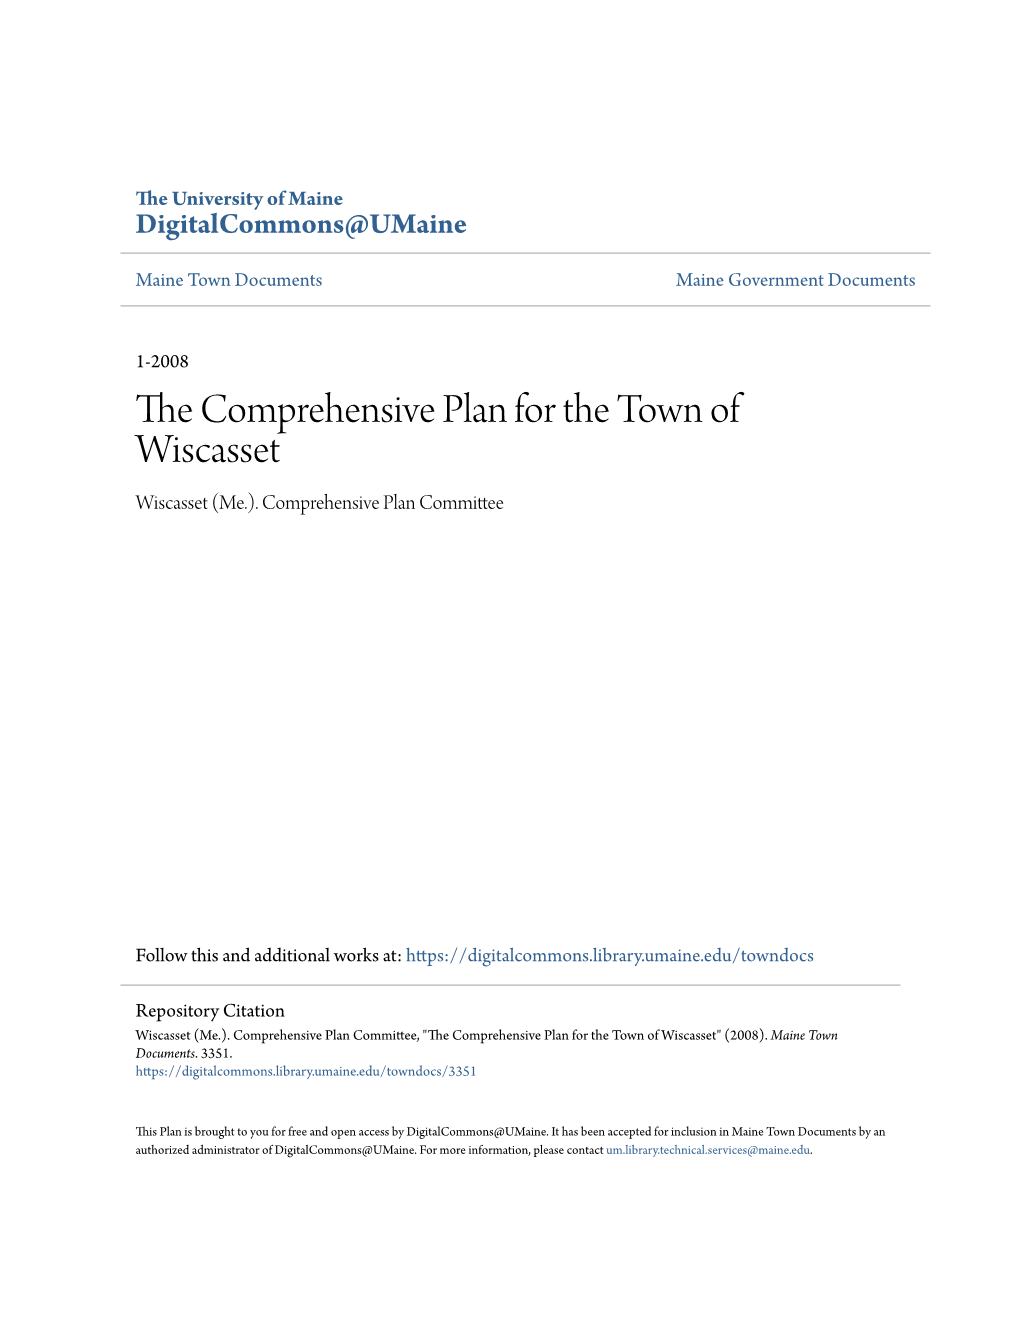 The Comprehensive Plan for the Town of Wiscasset